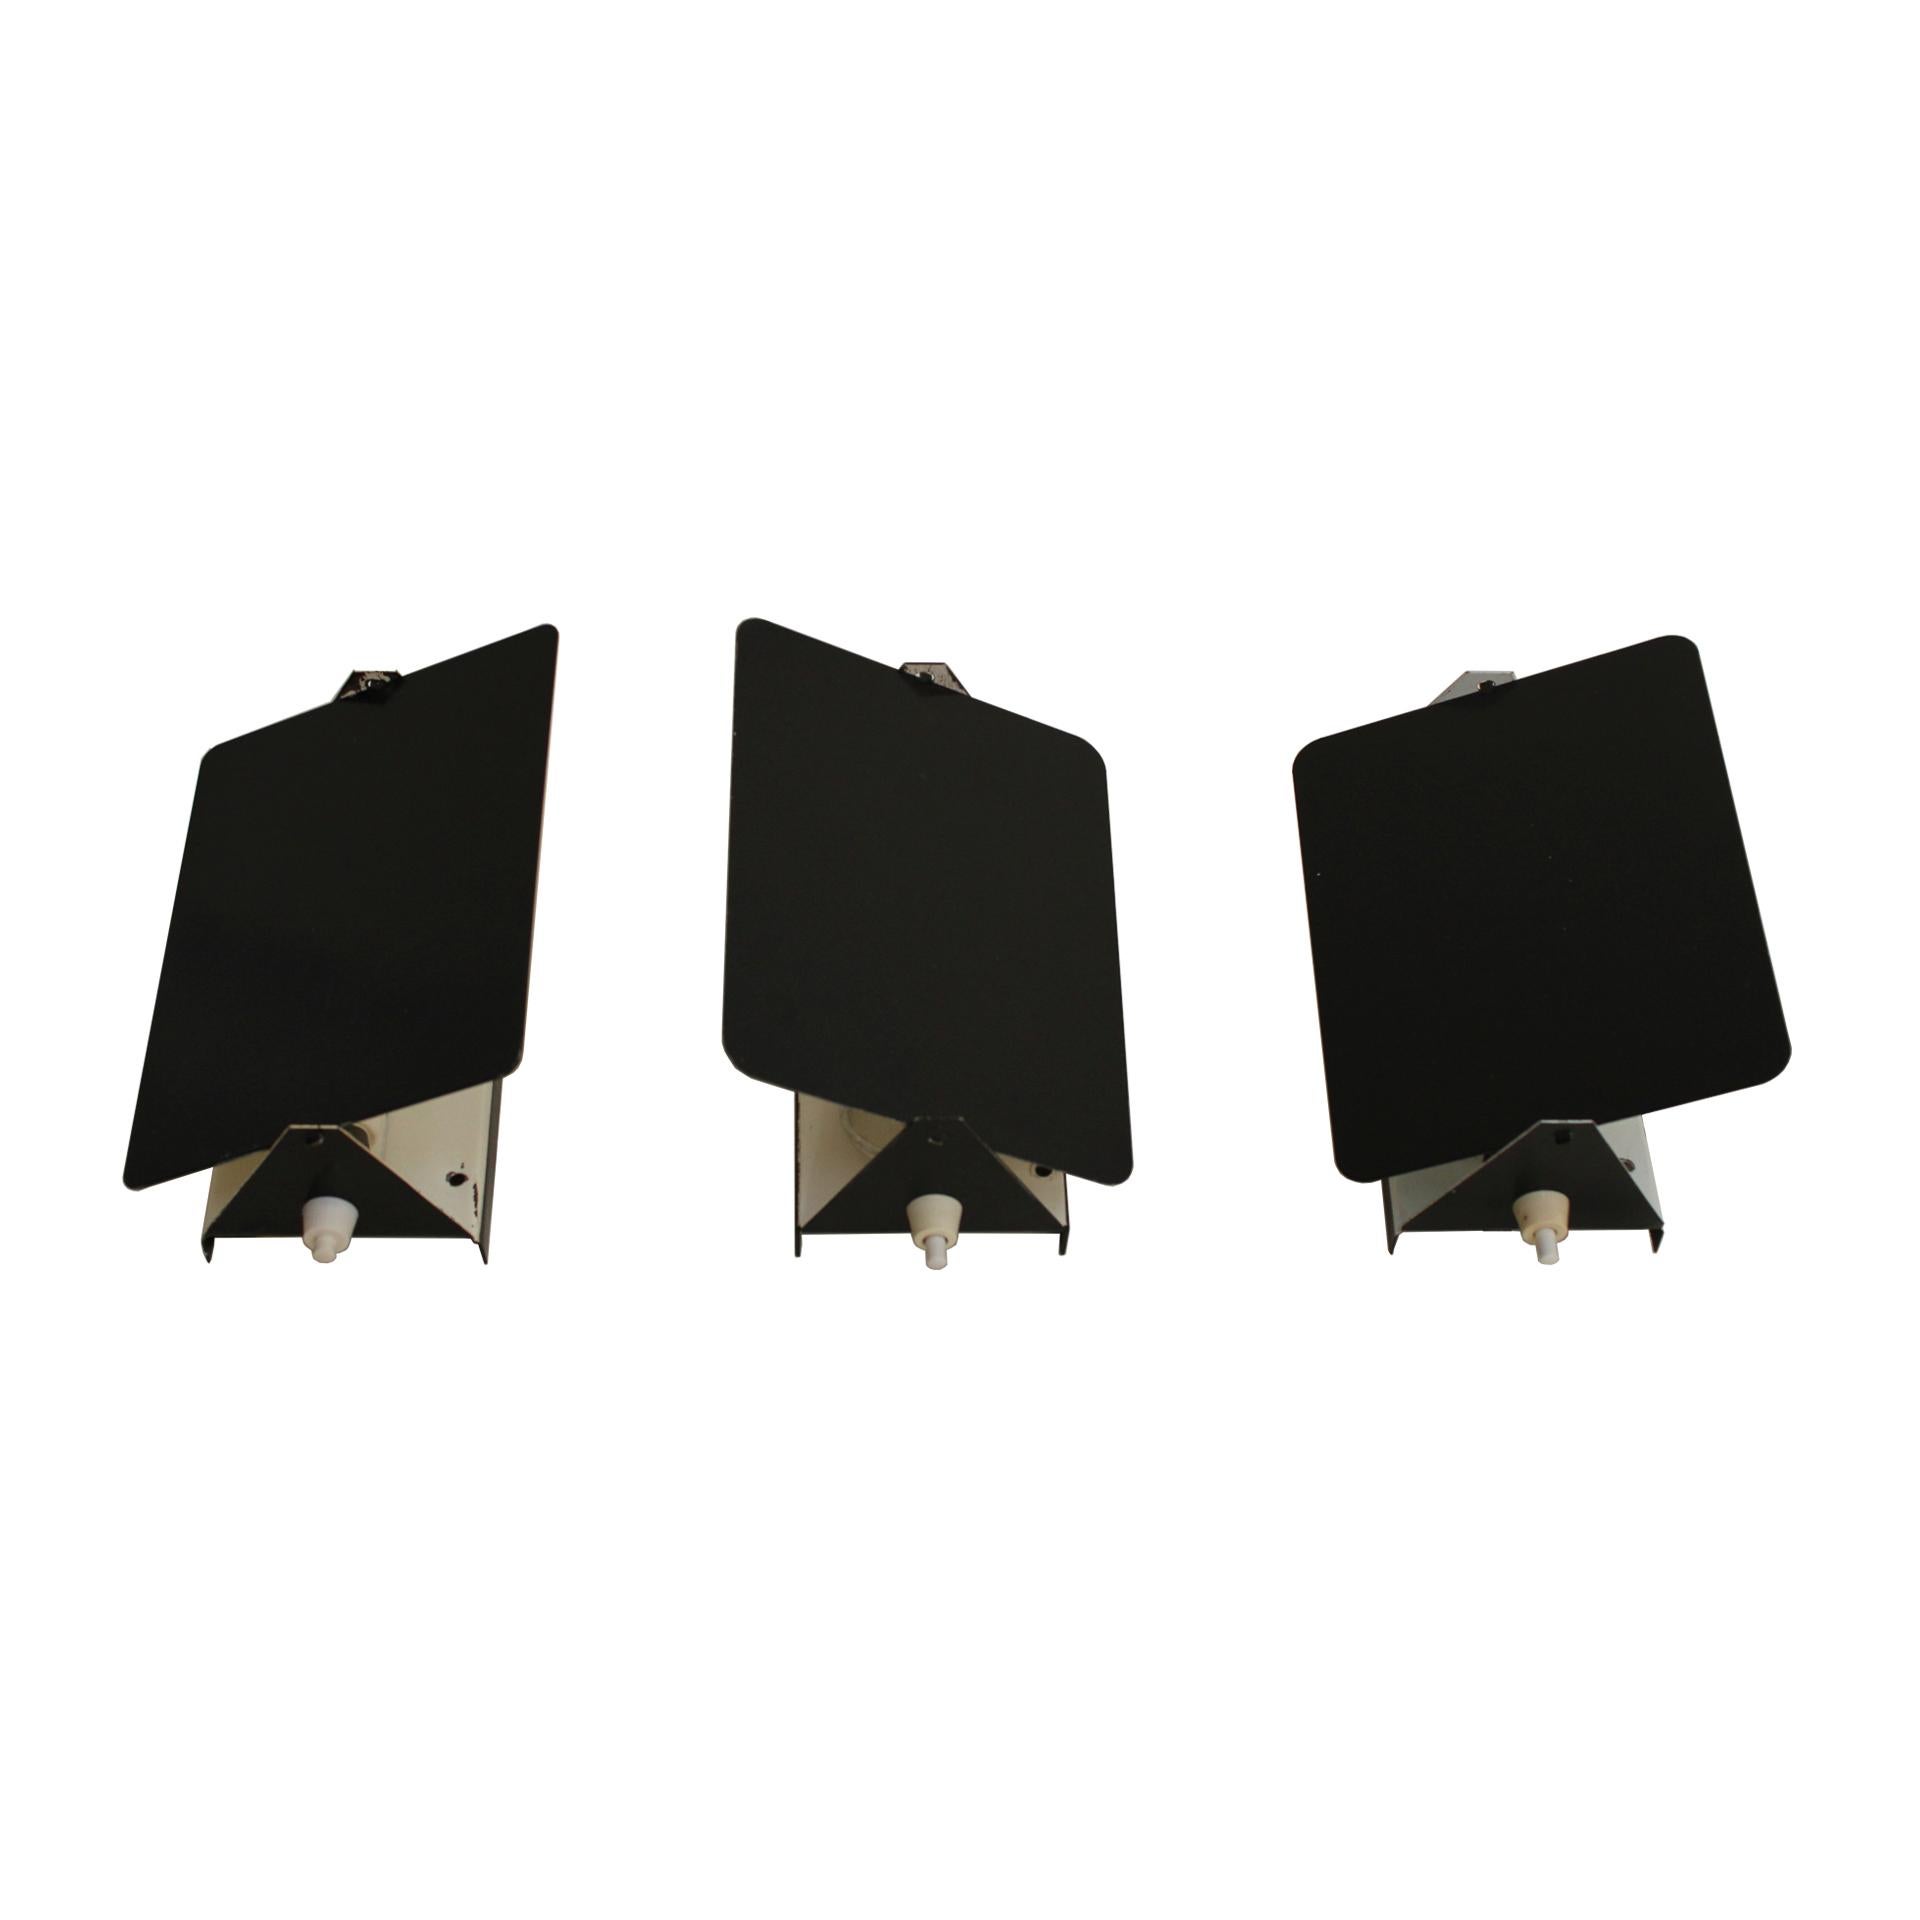 Set of three sconces mod. CP1 designed by Charlotte Perriand for Steph Simon, circa 1960. Composed of adjustable main structure to redirect the light. Made of black and white lacquered metal. With its original pattina.
      